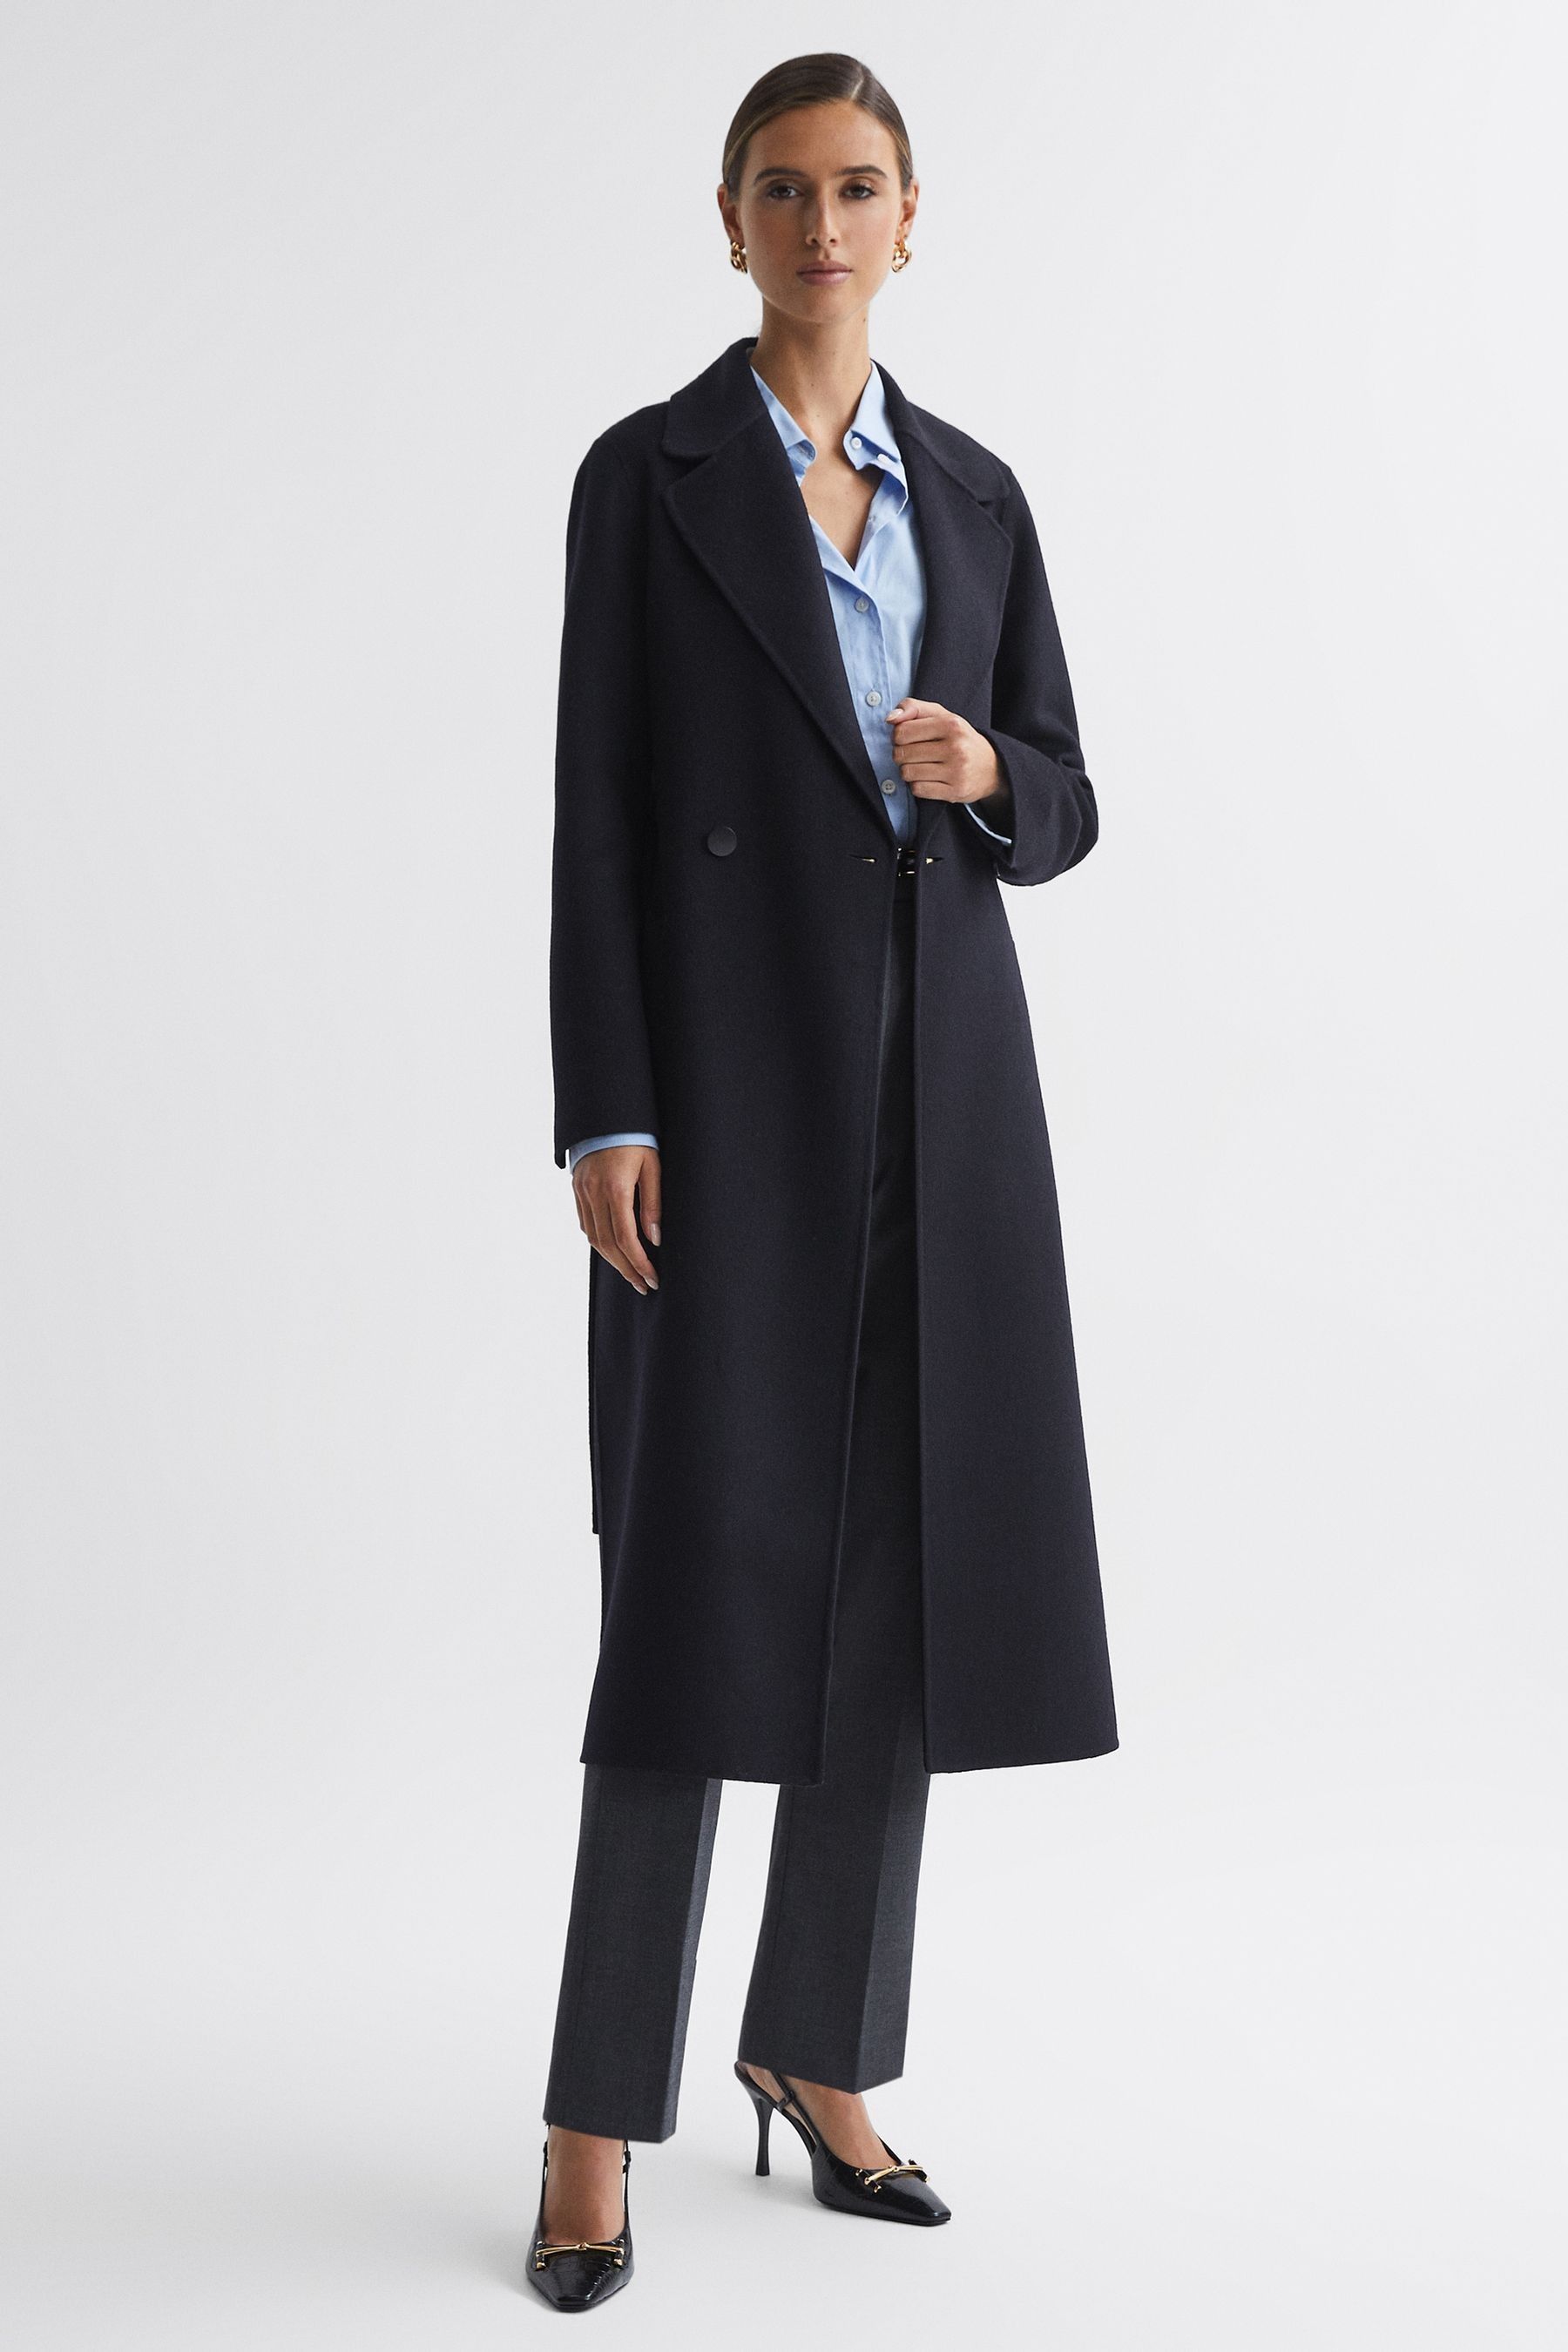 Reiss Lucia - Navy Relaxed Double Breasted Wool Blindseam Coat, Us 4